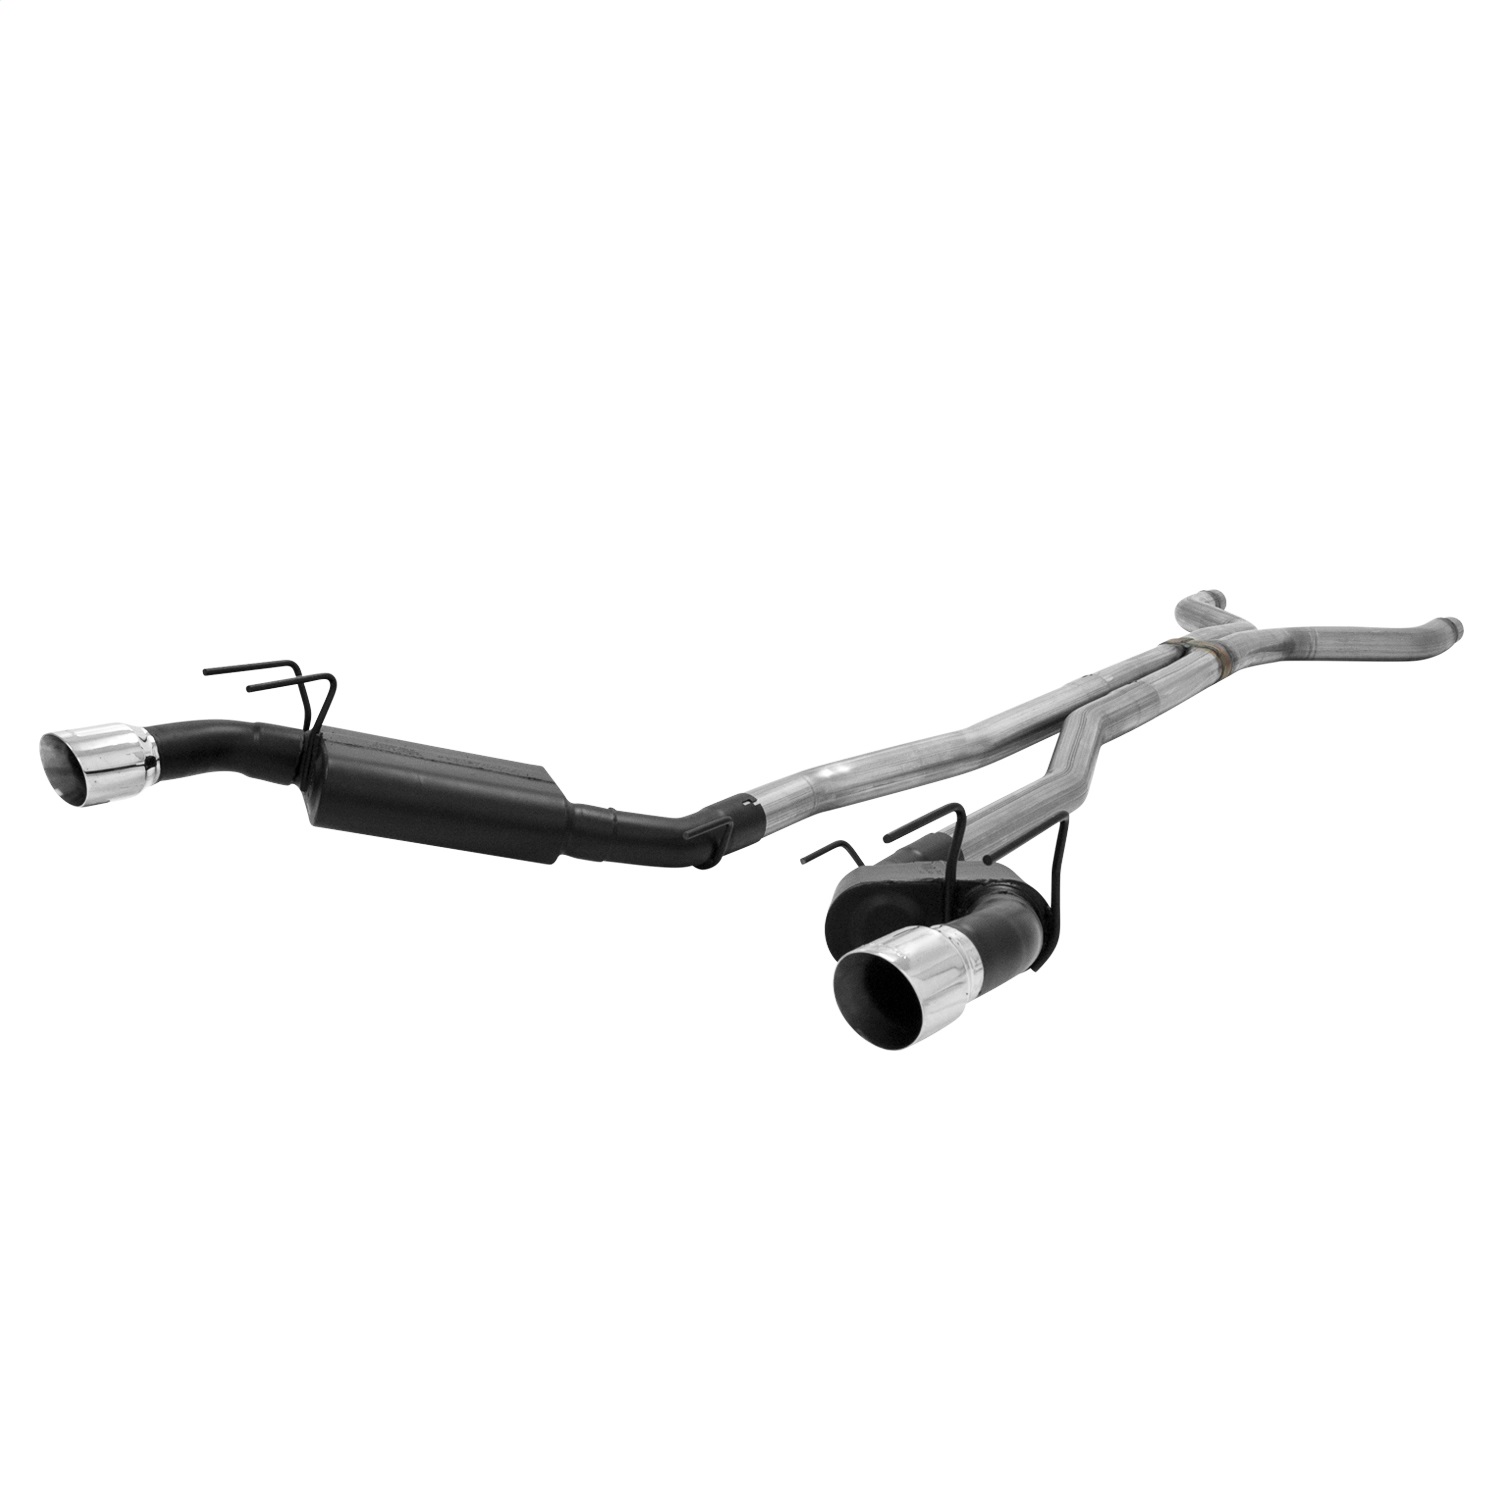 Flowmaster Flowmaster 817656 American Thunder Cat Back Exhaust System Fits 14-15 Camaro